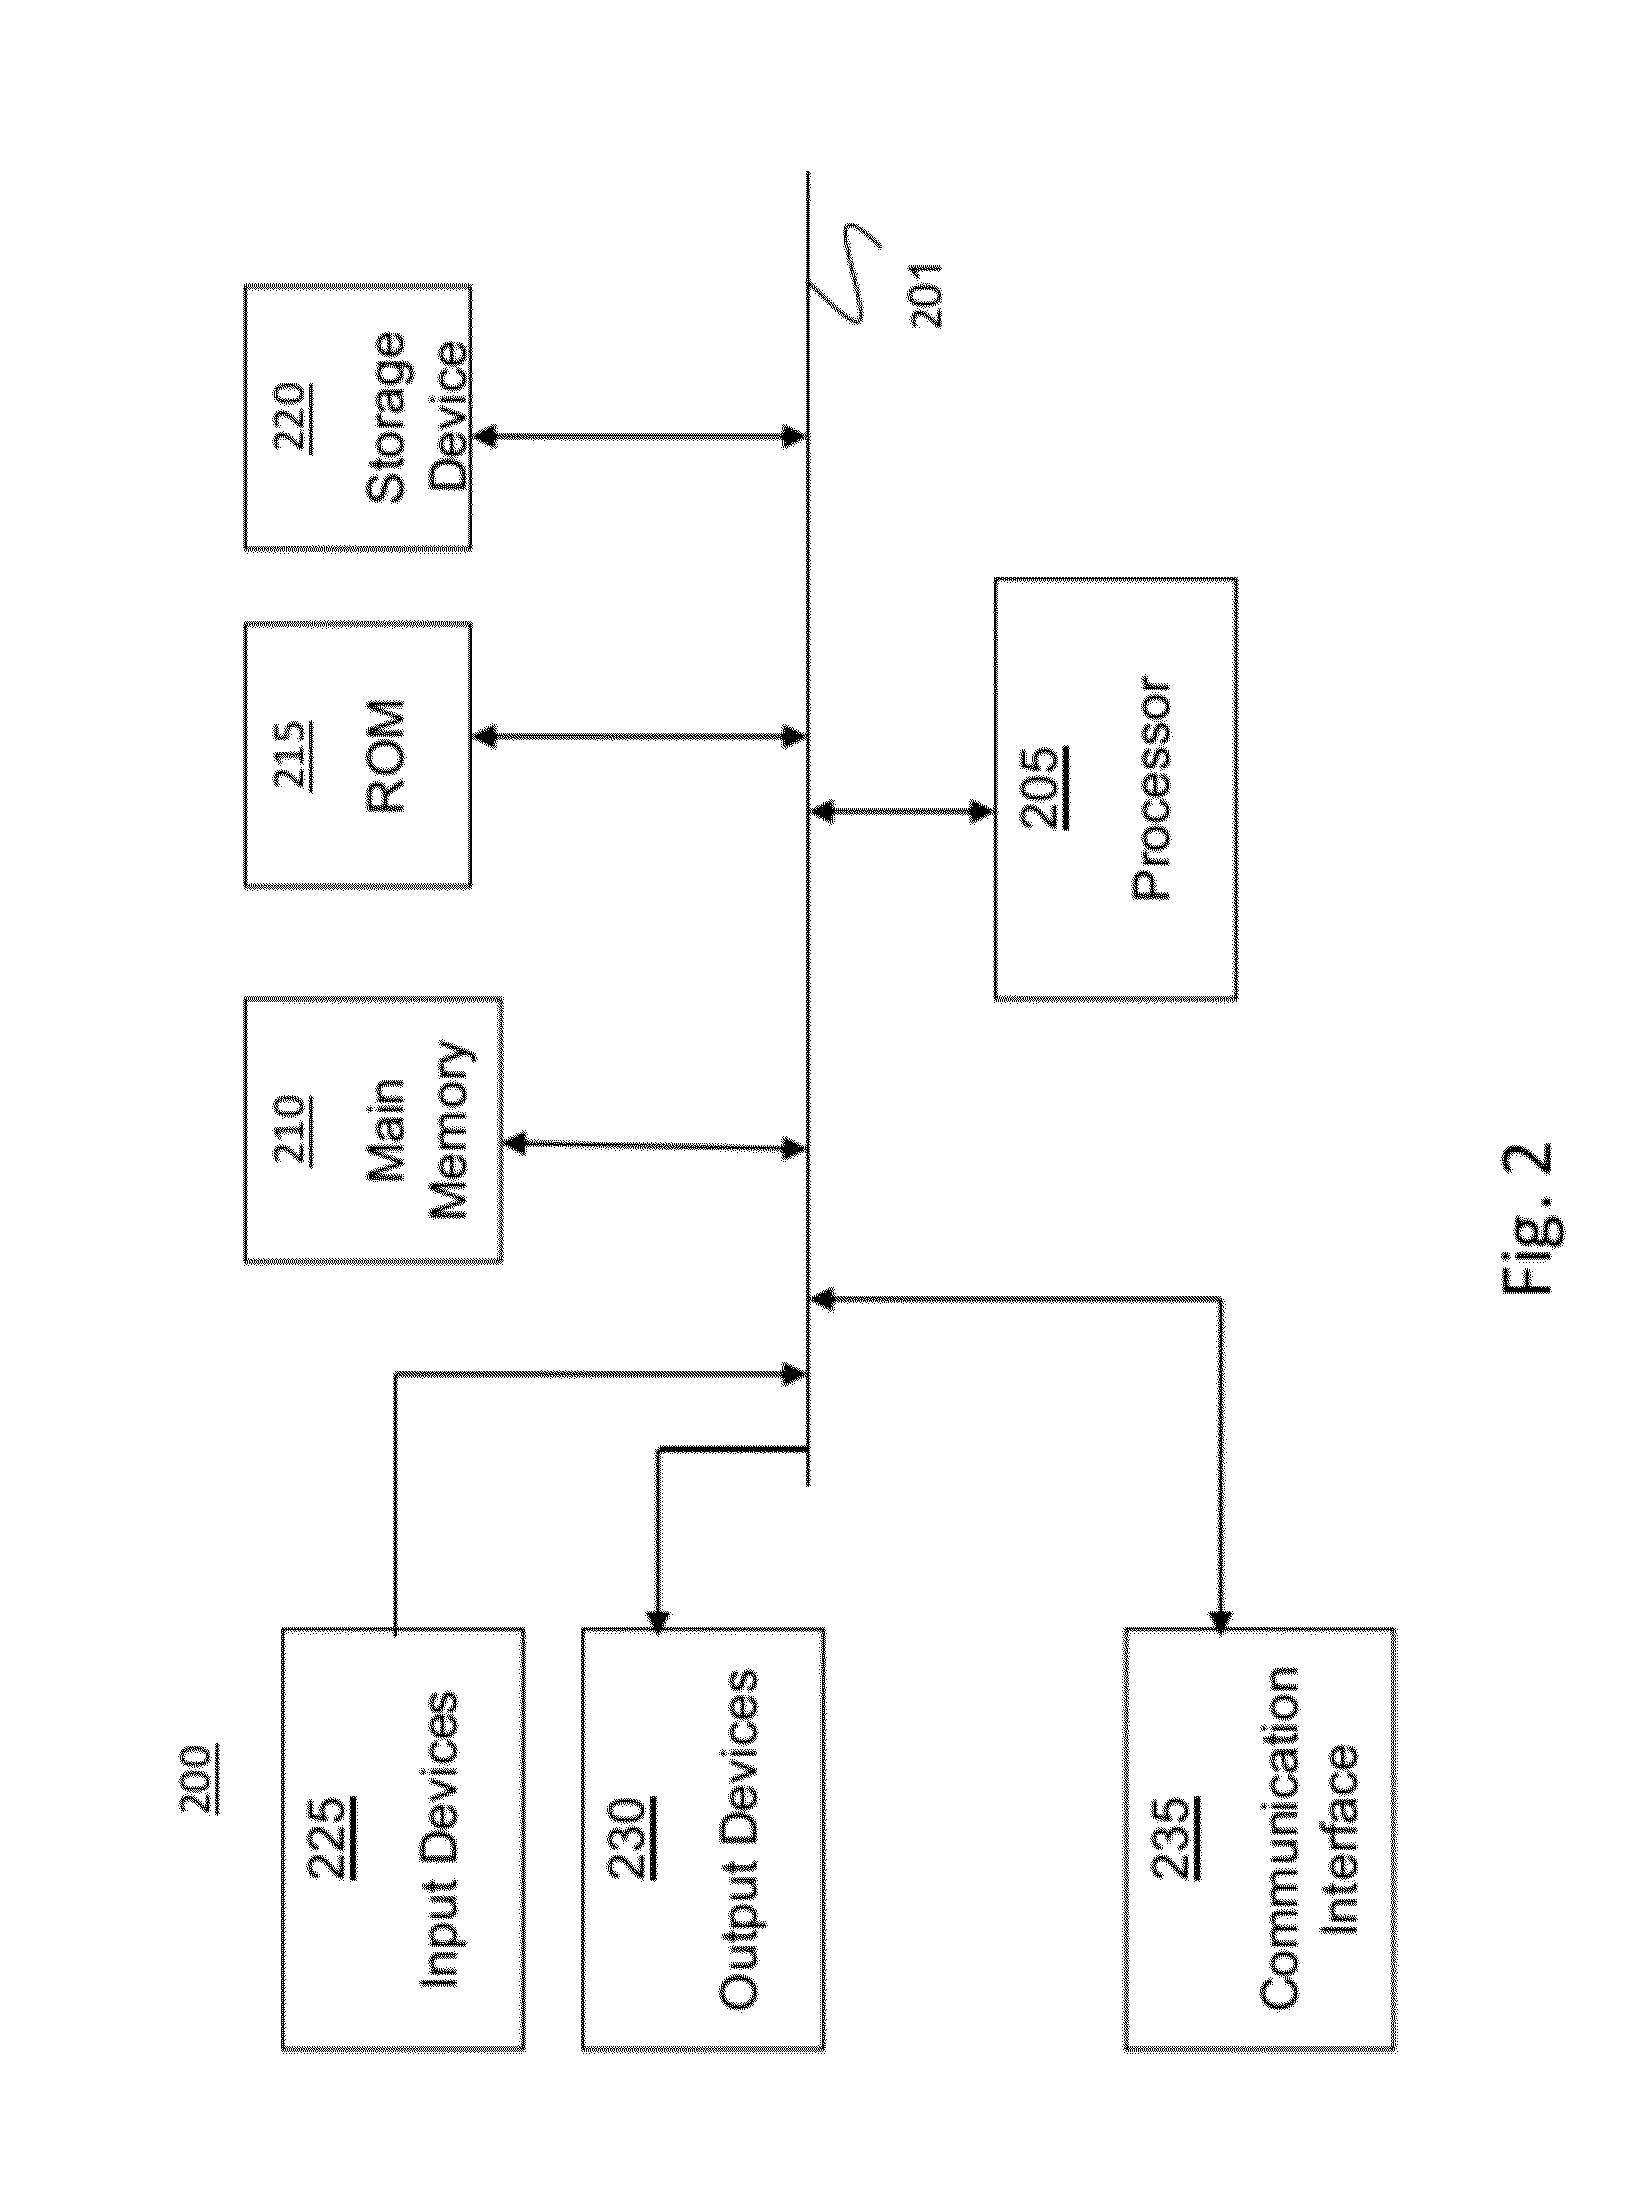 Method and System for Online Detection of Multi-Component Interactions in Computing Systems